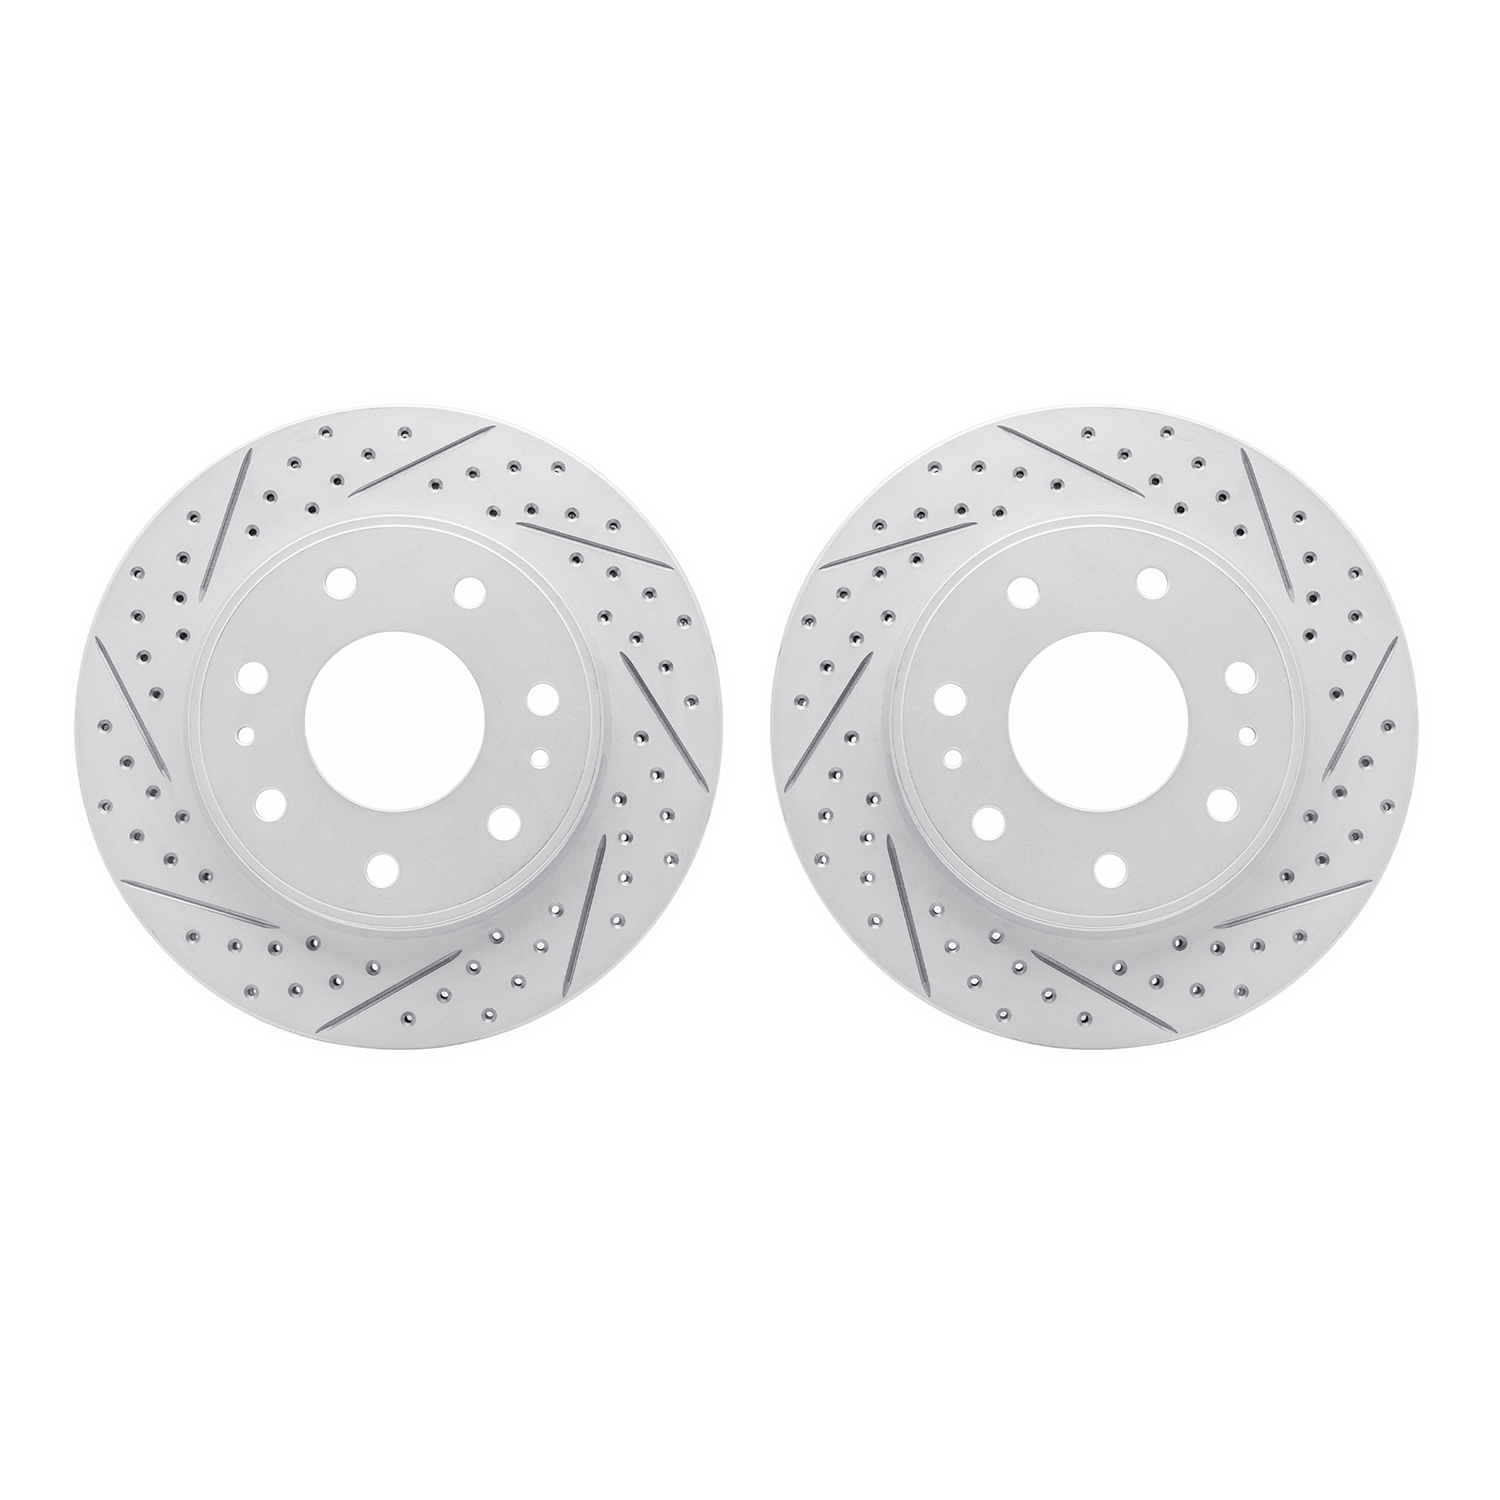 2002-54056 Geoperformance Drilled/Slotted Brake Rotors, 2009-2009 Ford/Lincoln/Mercury/Mazda, Position: Front